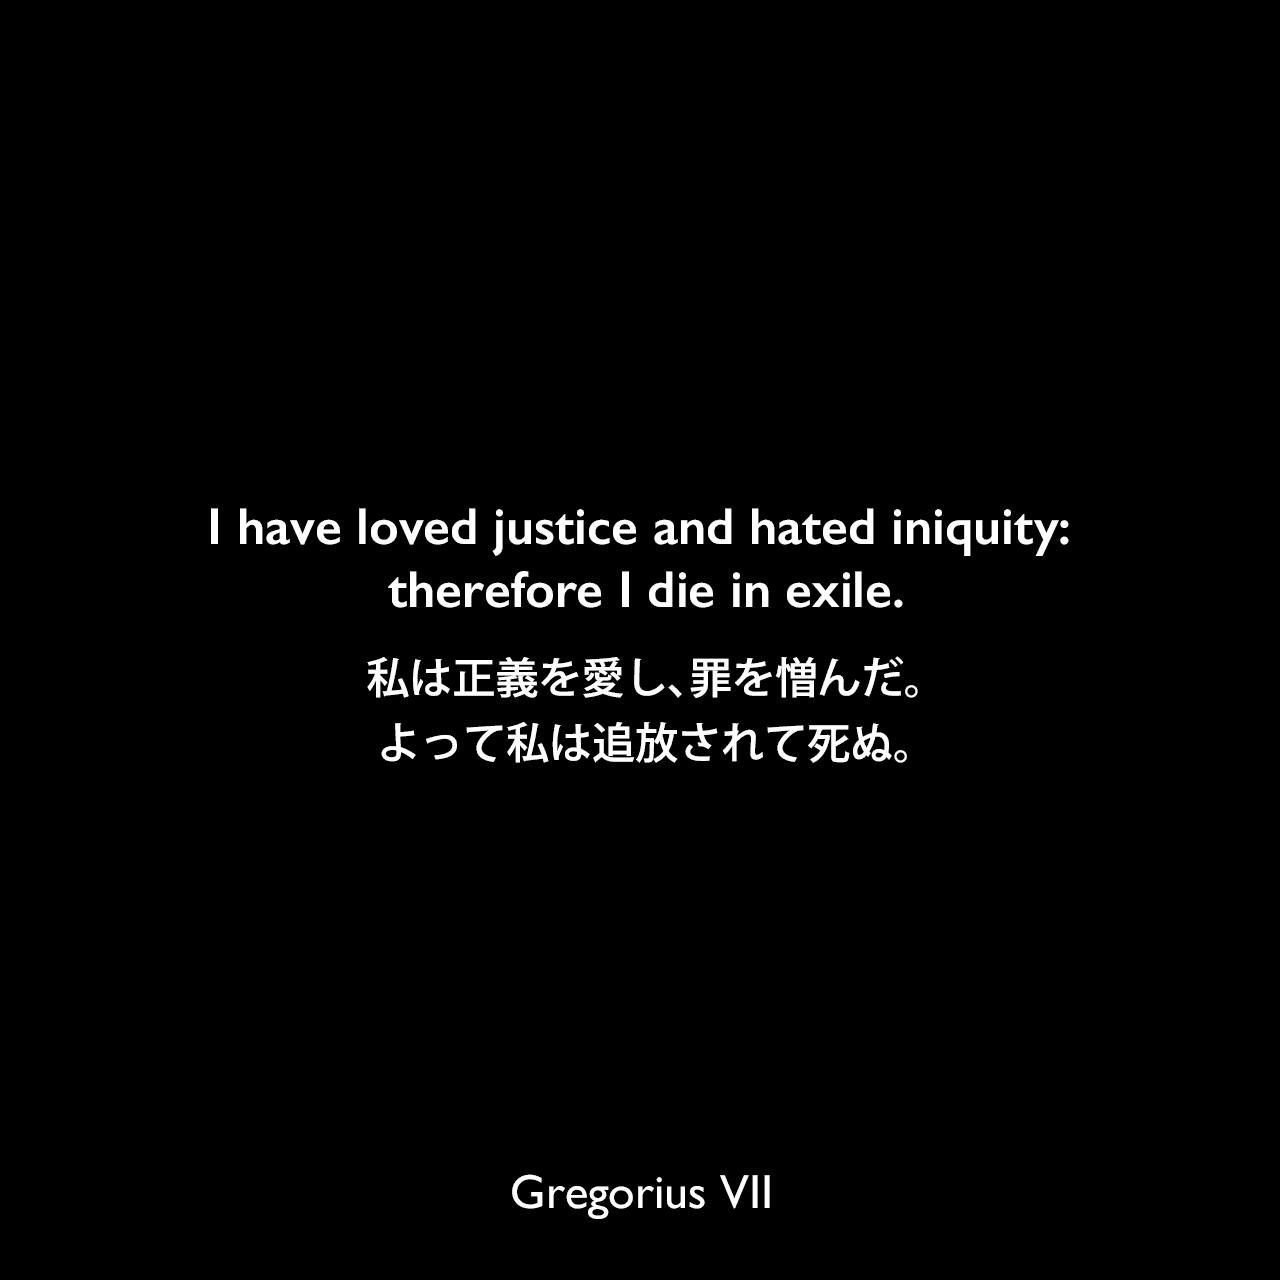 I have loved justice and hated iniquity: therefore I die in exile.私は正義を愛し、罪を憎んだ。よって私は追放されて死ぬ。Gregorius VII